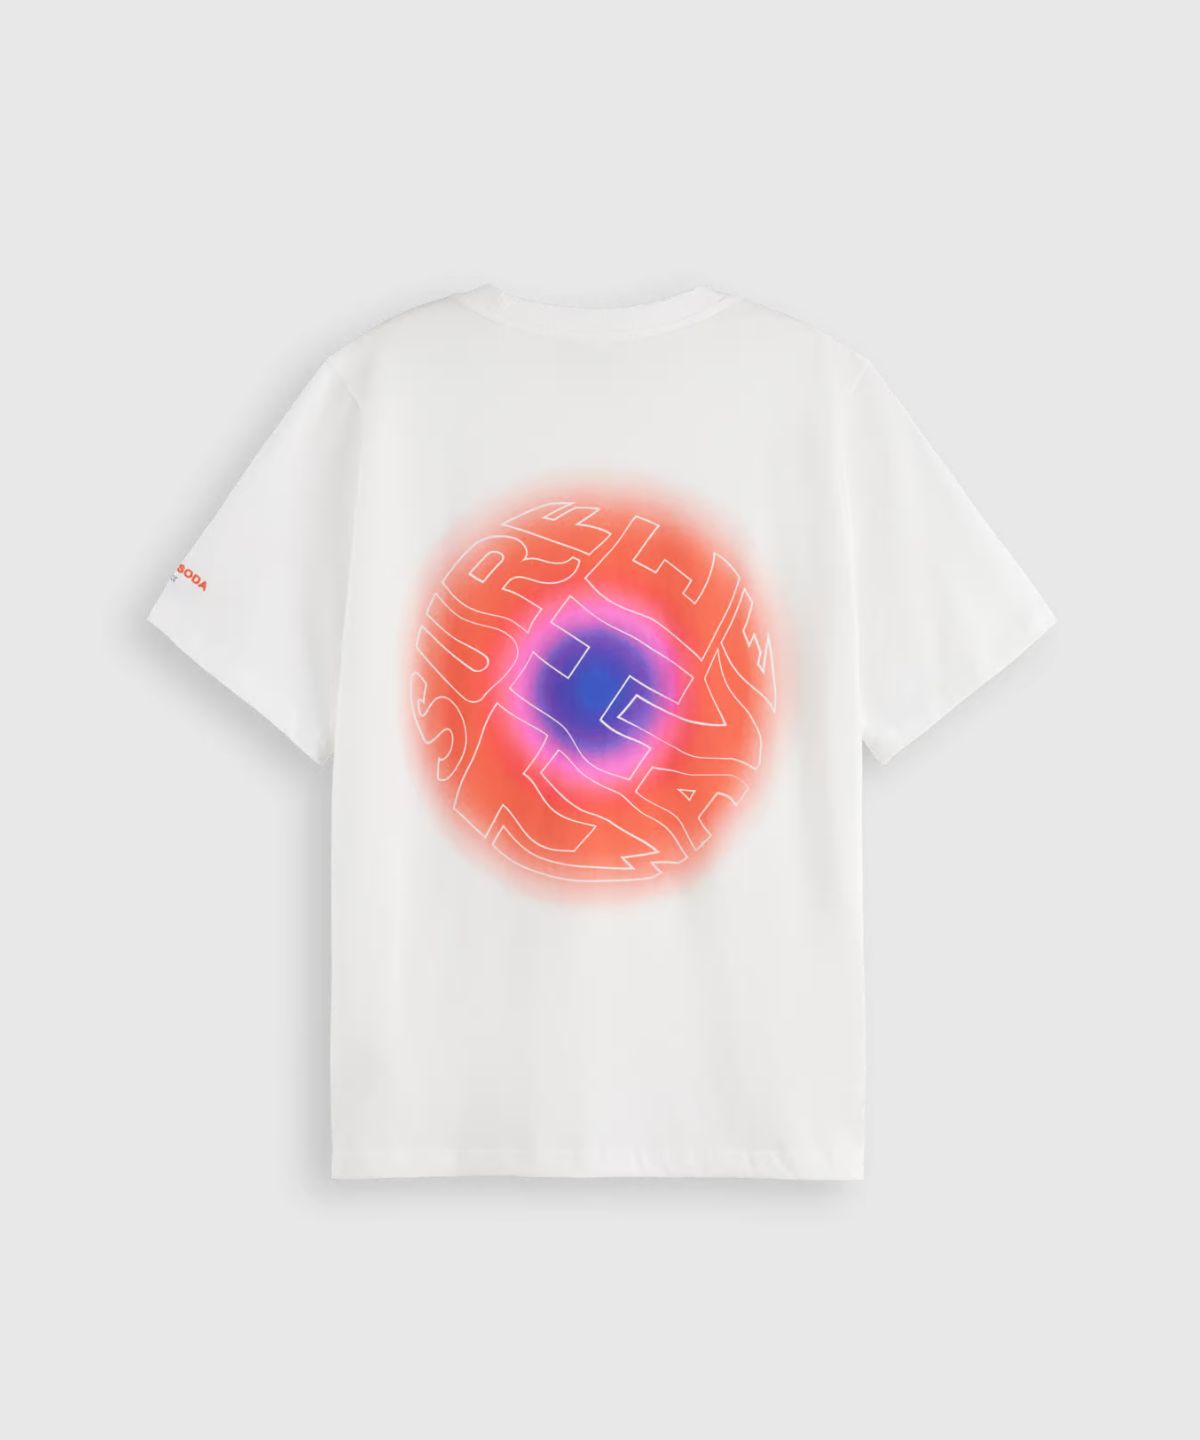 Relaxed fit artwork t-shirt